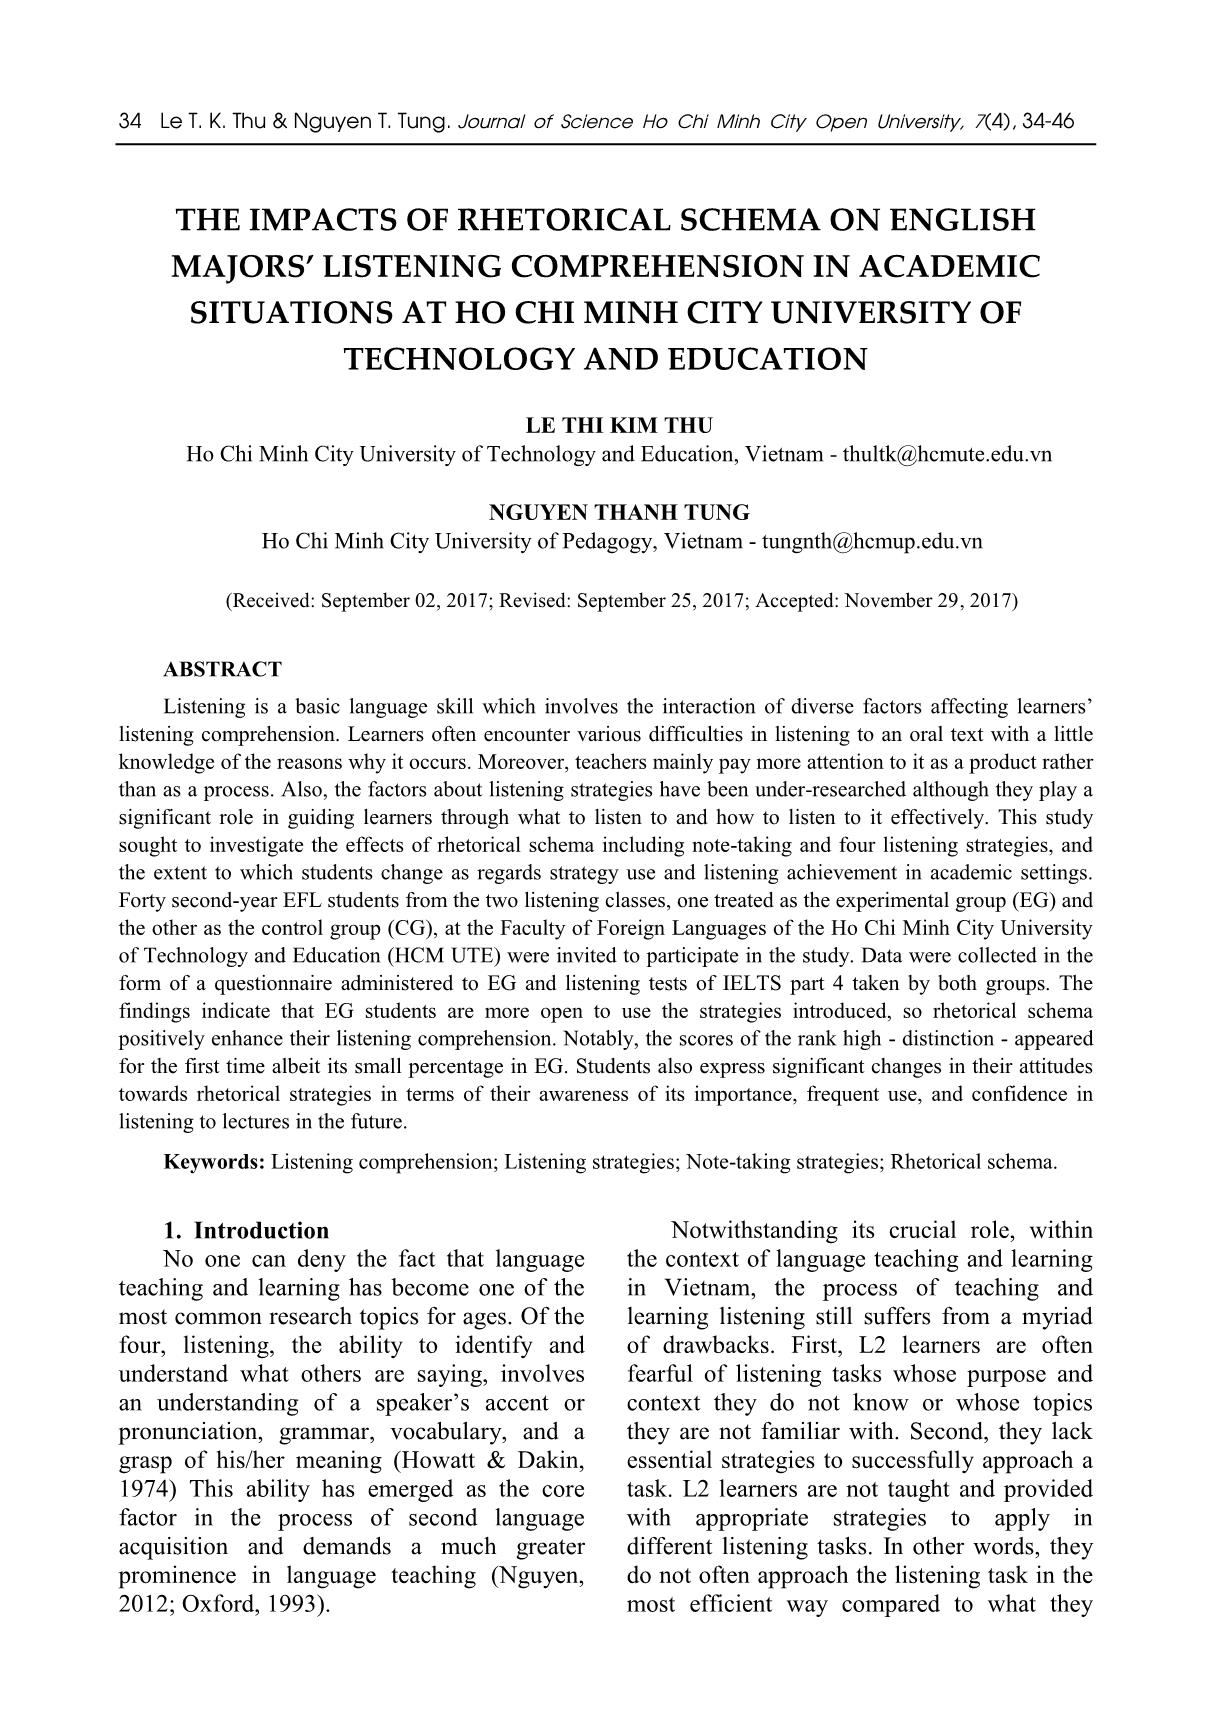 The impacts of rhetorical schema on English majors’ listening comprehension in academic situations at ho chi minh city university of technology and education trang 1